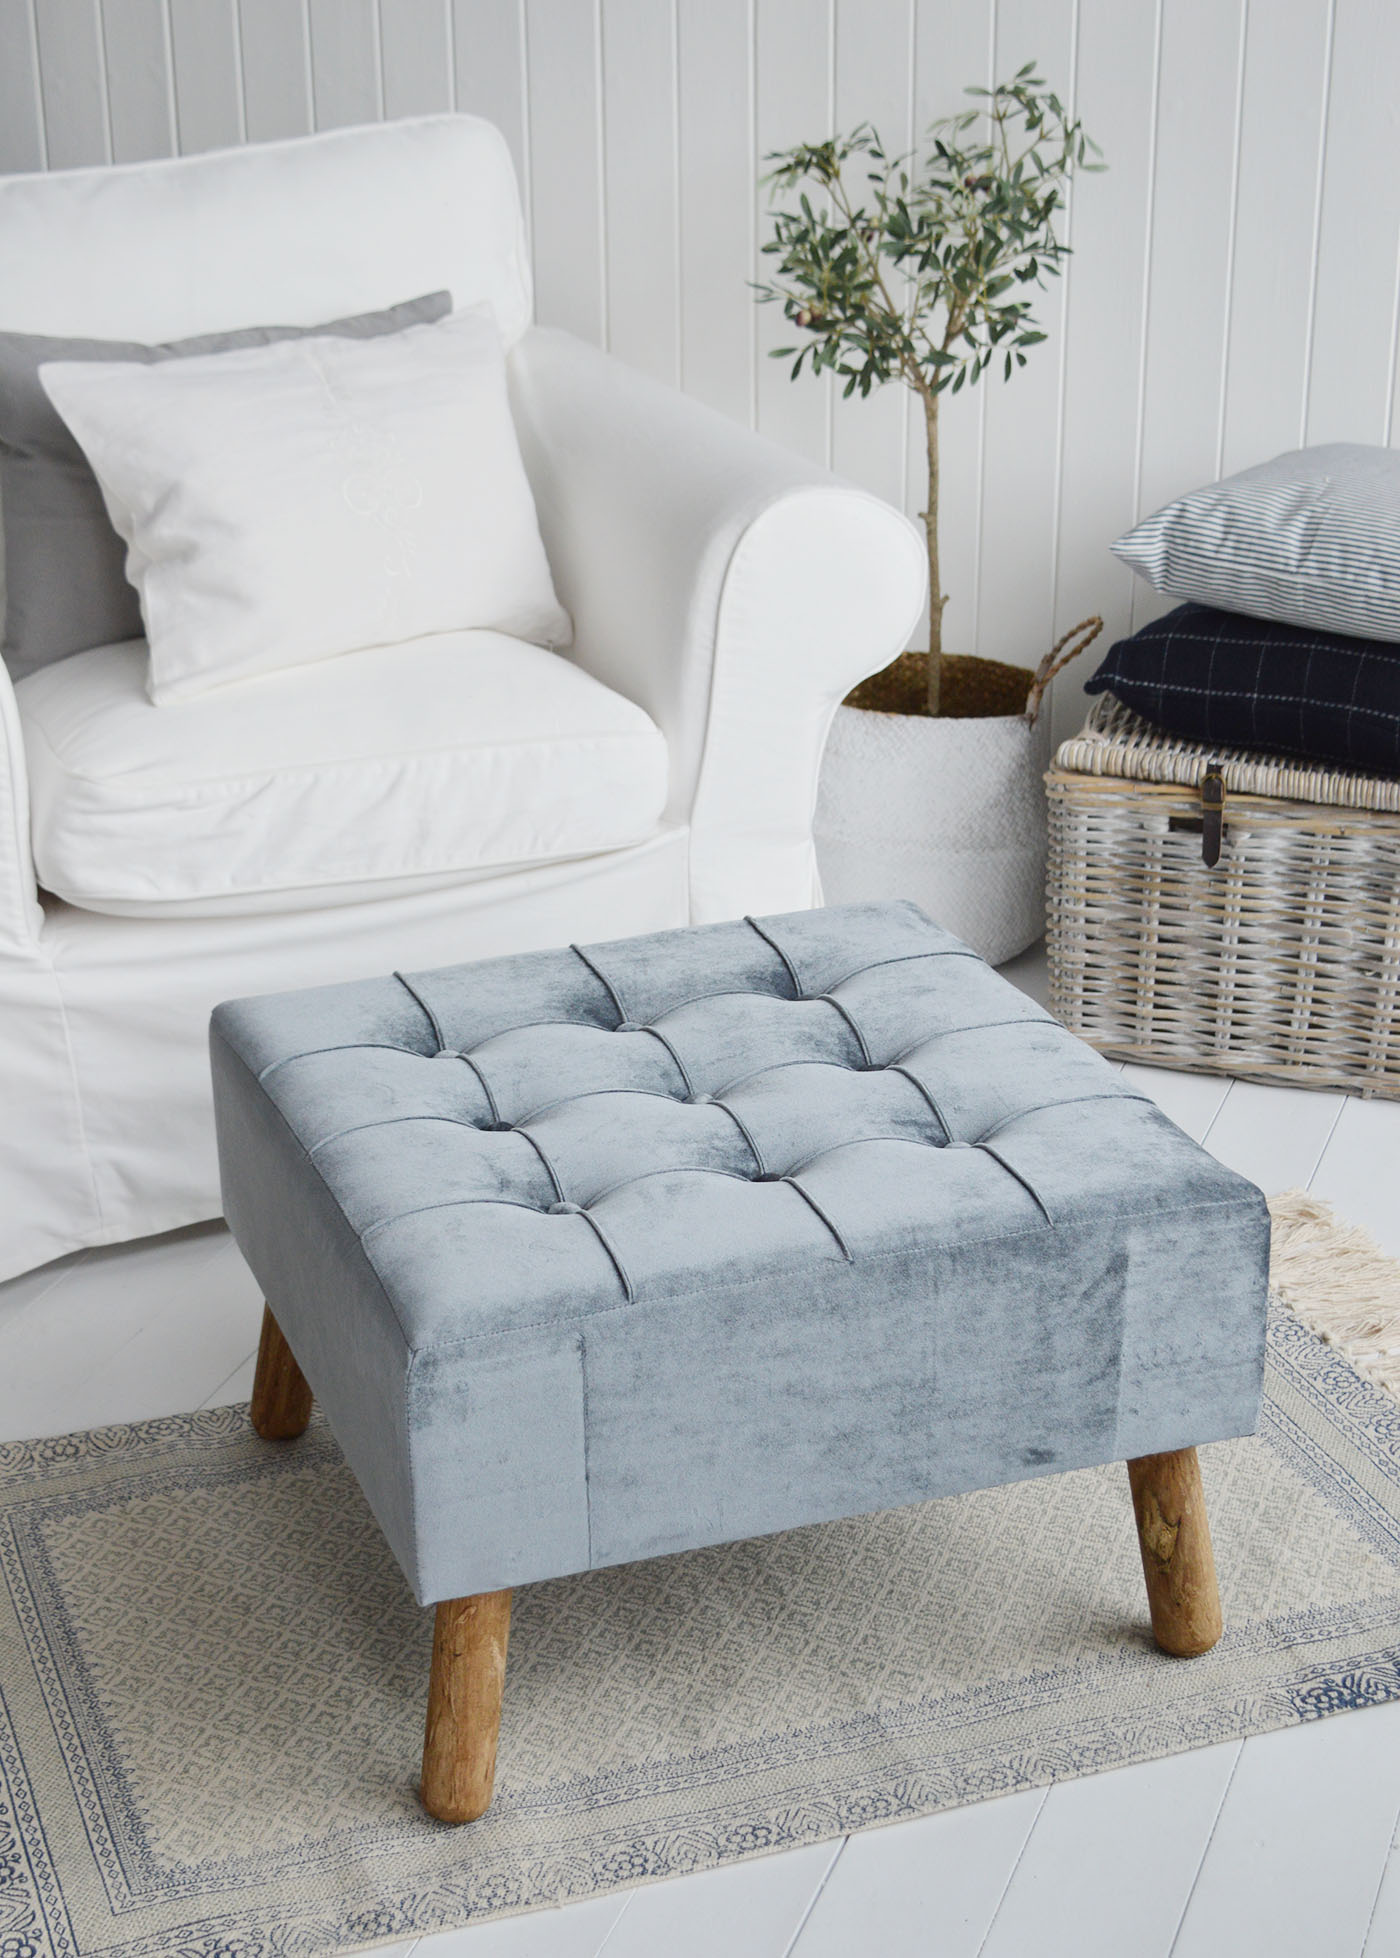 The New London footstool and ottoman in a buttoned luxurious blue grey velvet with aged oak coloured legs.A beautiful classic, timeless addition for all New England style homes in the country, by the coast and in the city